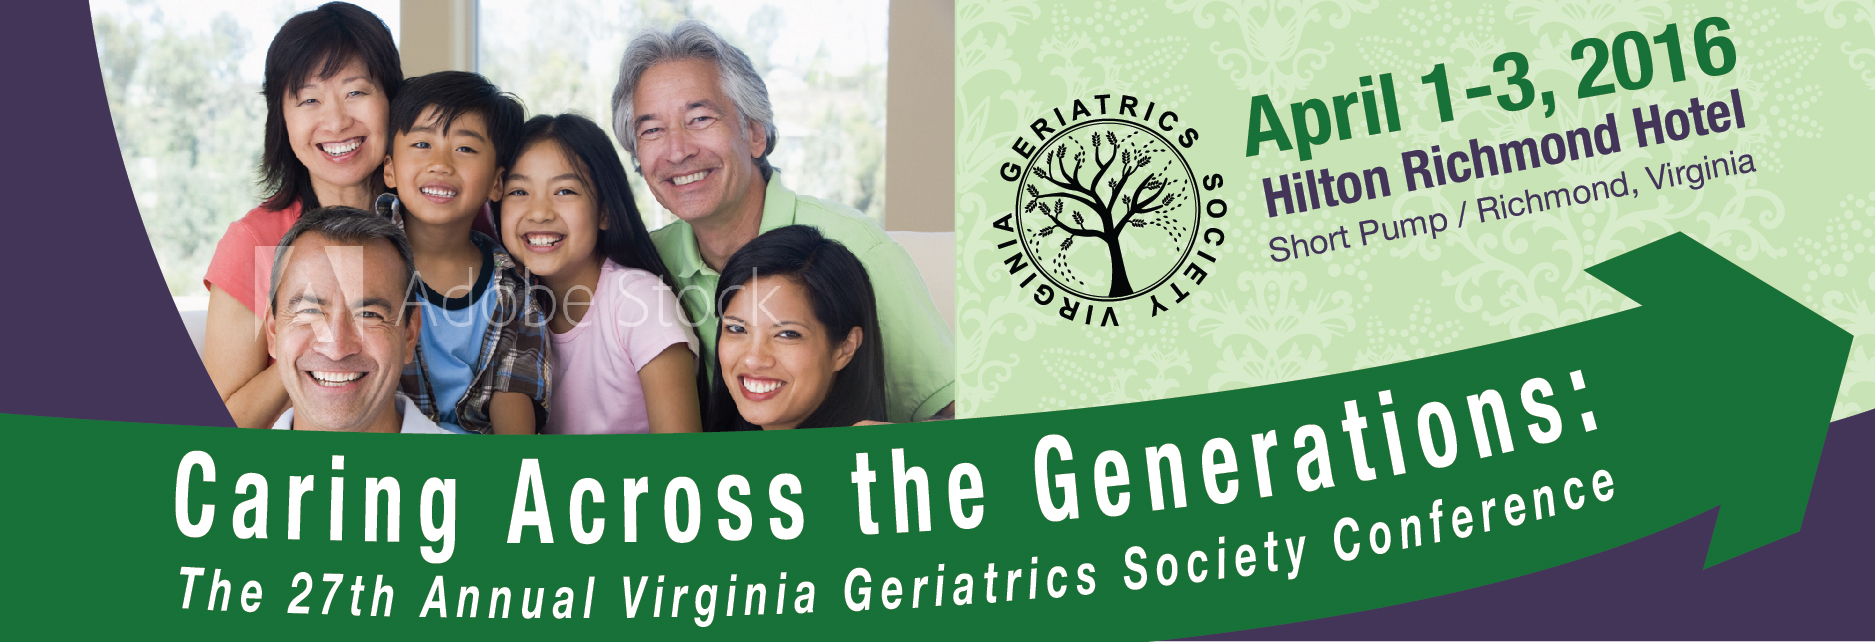 2016 VGS Annual Conference